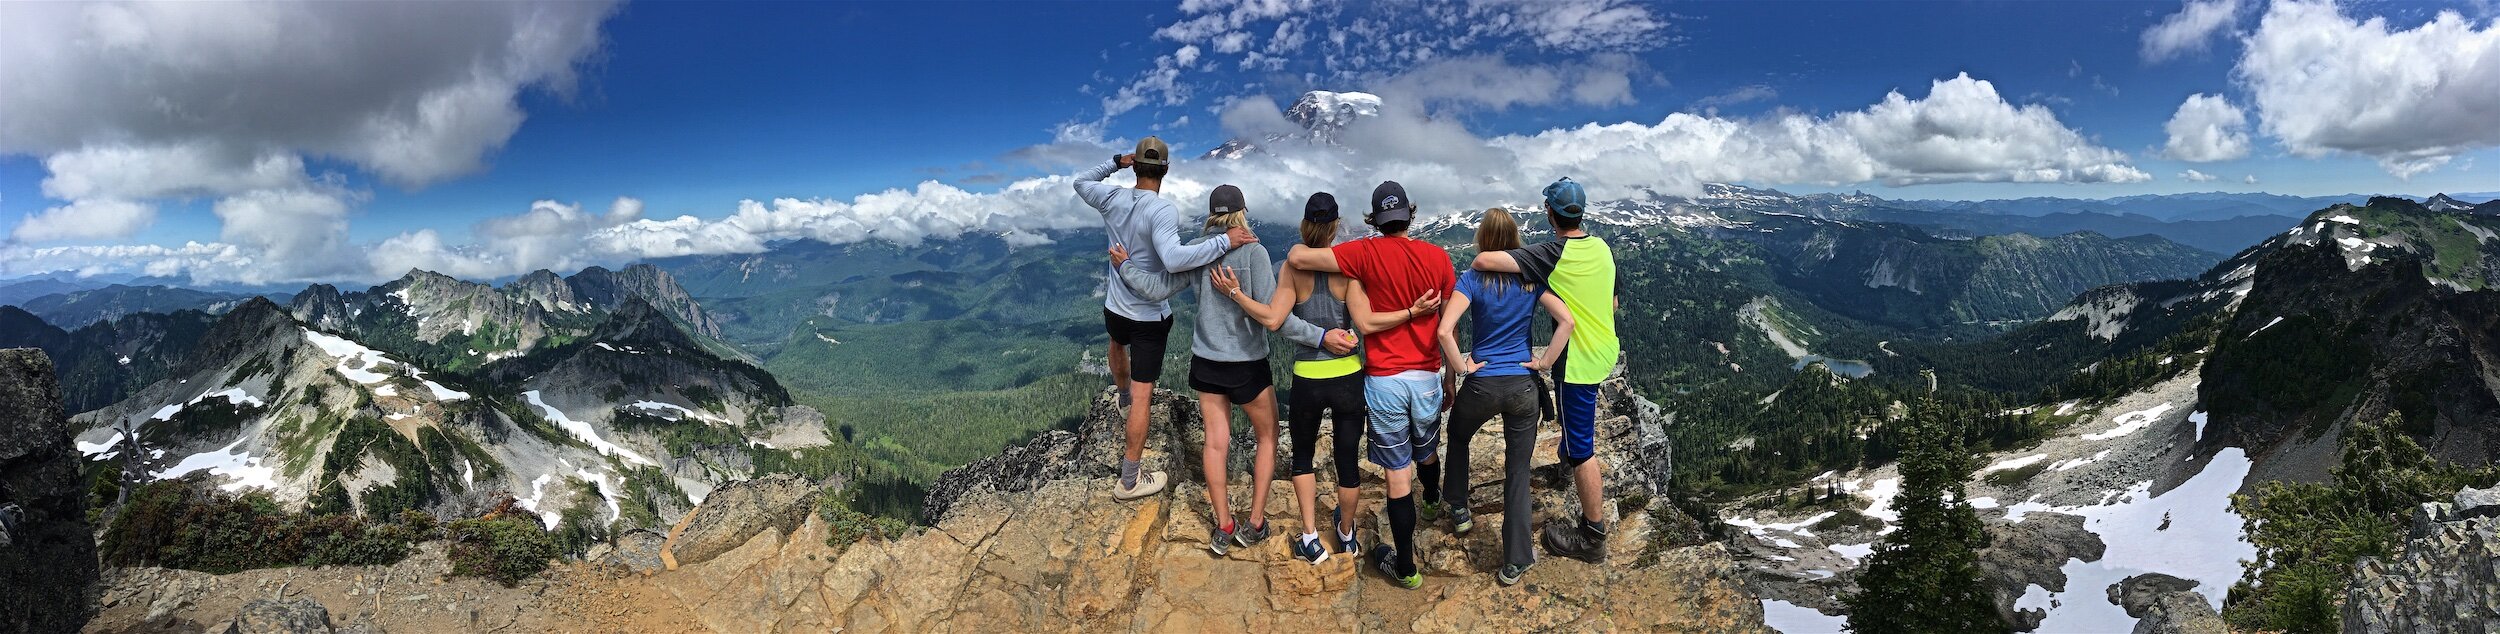 A group of hiking friends enjoy the view of Mount Hood together from the top of the rocky cliffs in Mount Hood national forest Oregon.jpeg